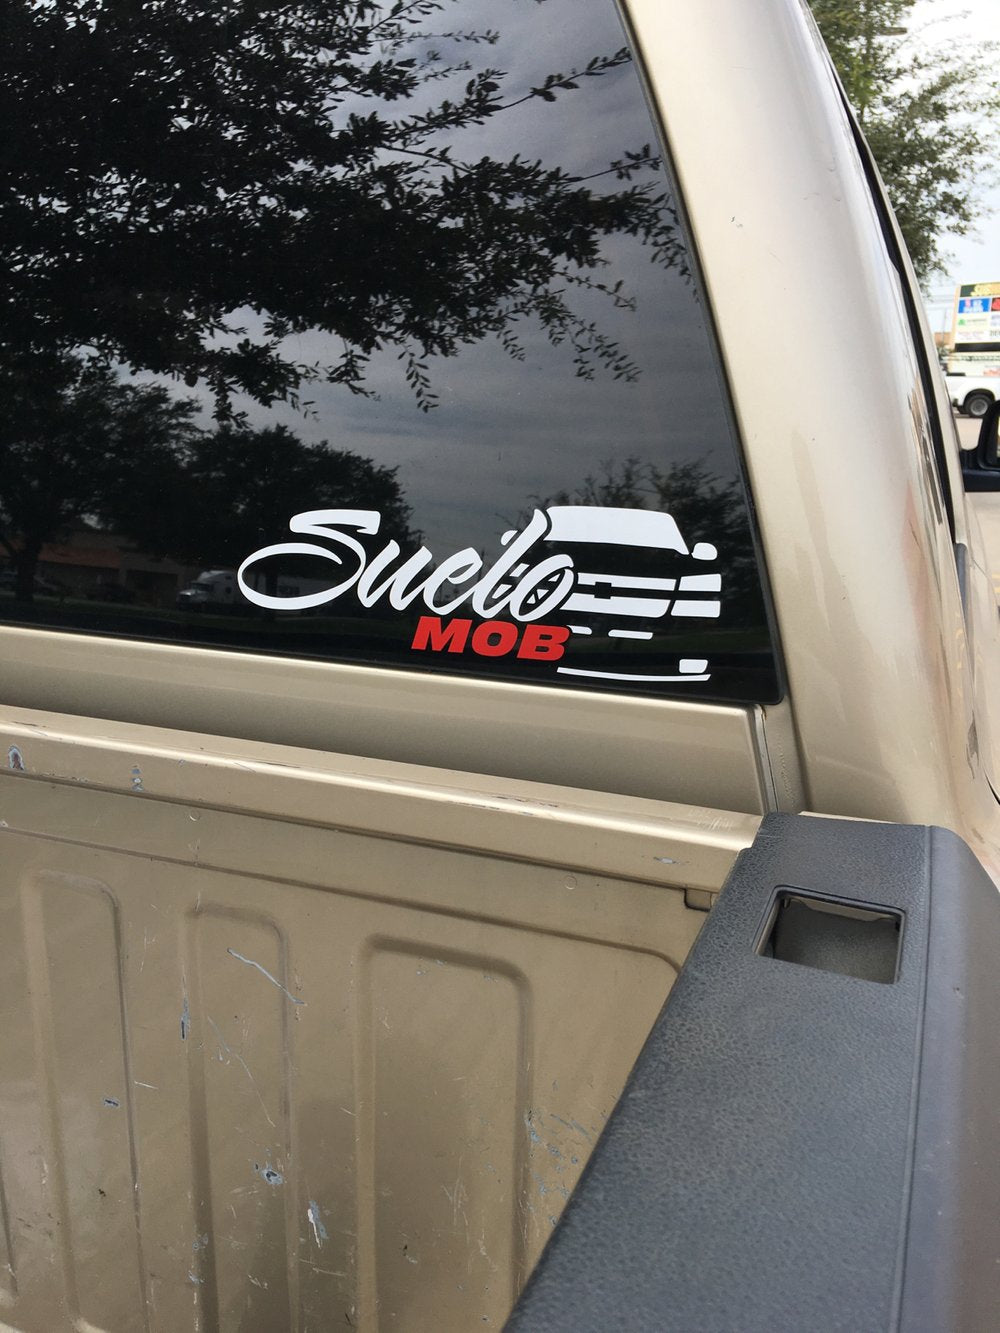 03-06 Chevy Decal